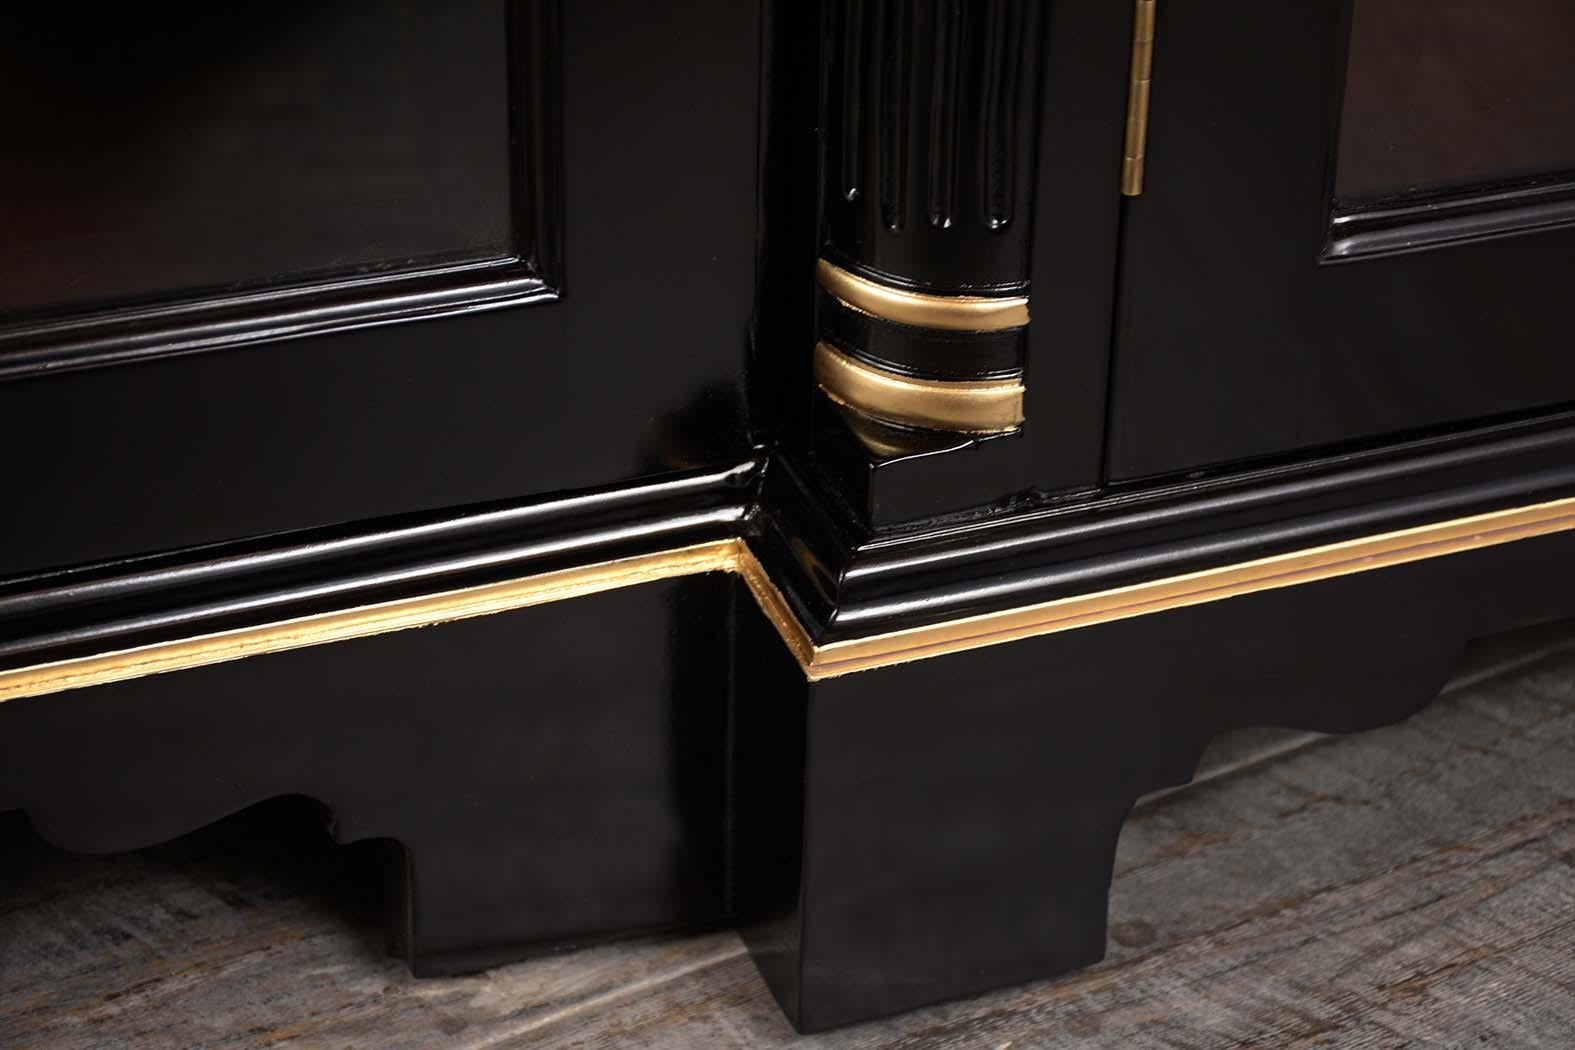 Four Doors Regency Style Bookcase with a Black Lacquered Finish 4